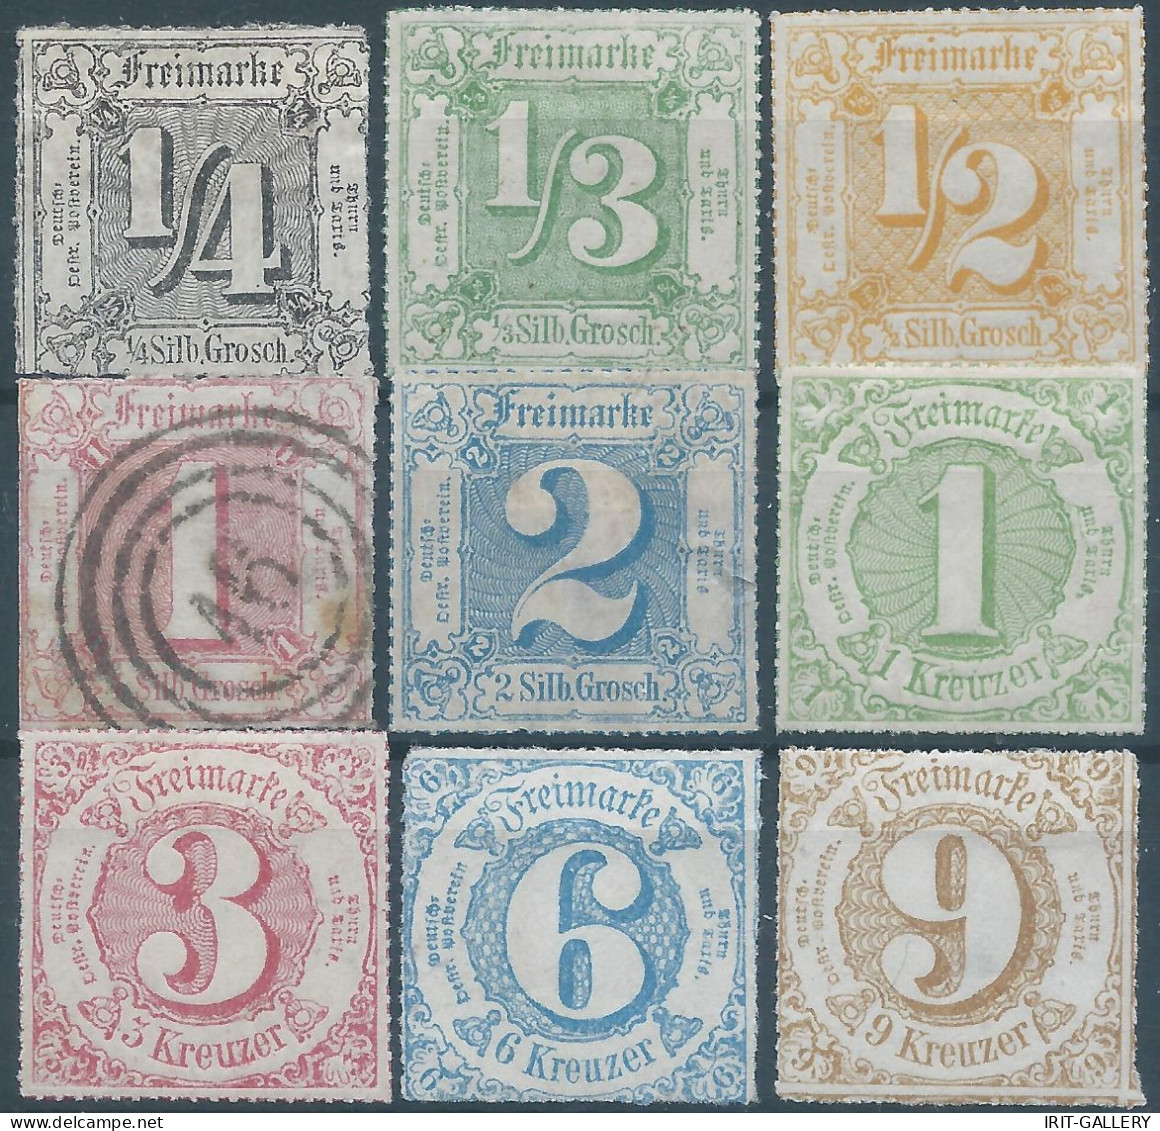 Germany-Deutschland,Thurn Und Taxis1865 Colored Print On White Paper-¼--½-1-2gr+1-3-6-9kr,Mint &1gr Used,Value:€130,00 - Postfris